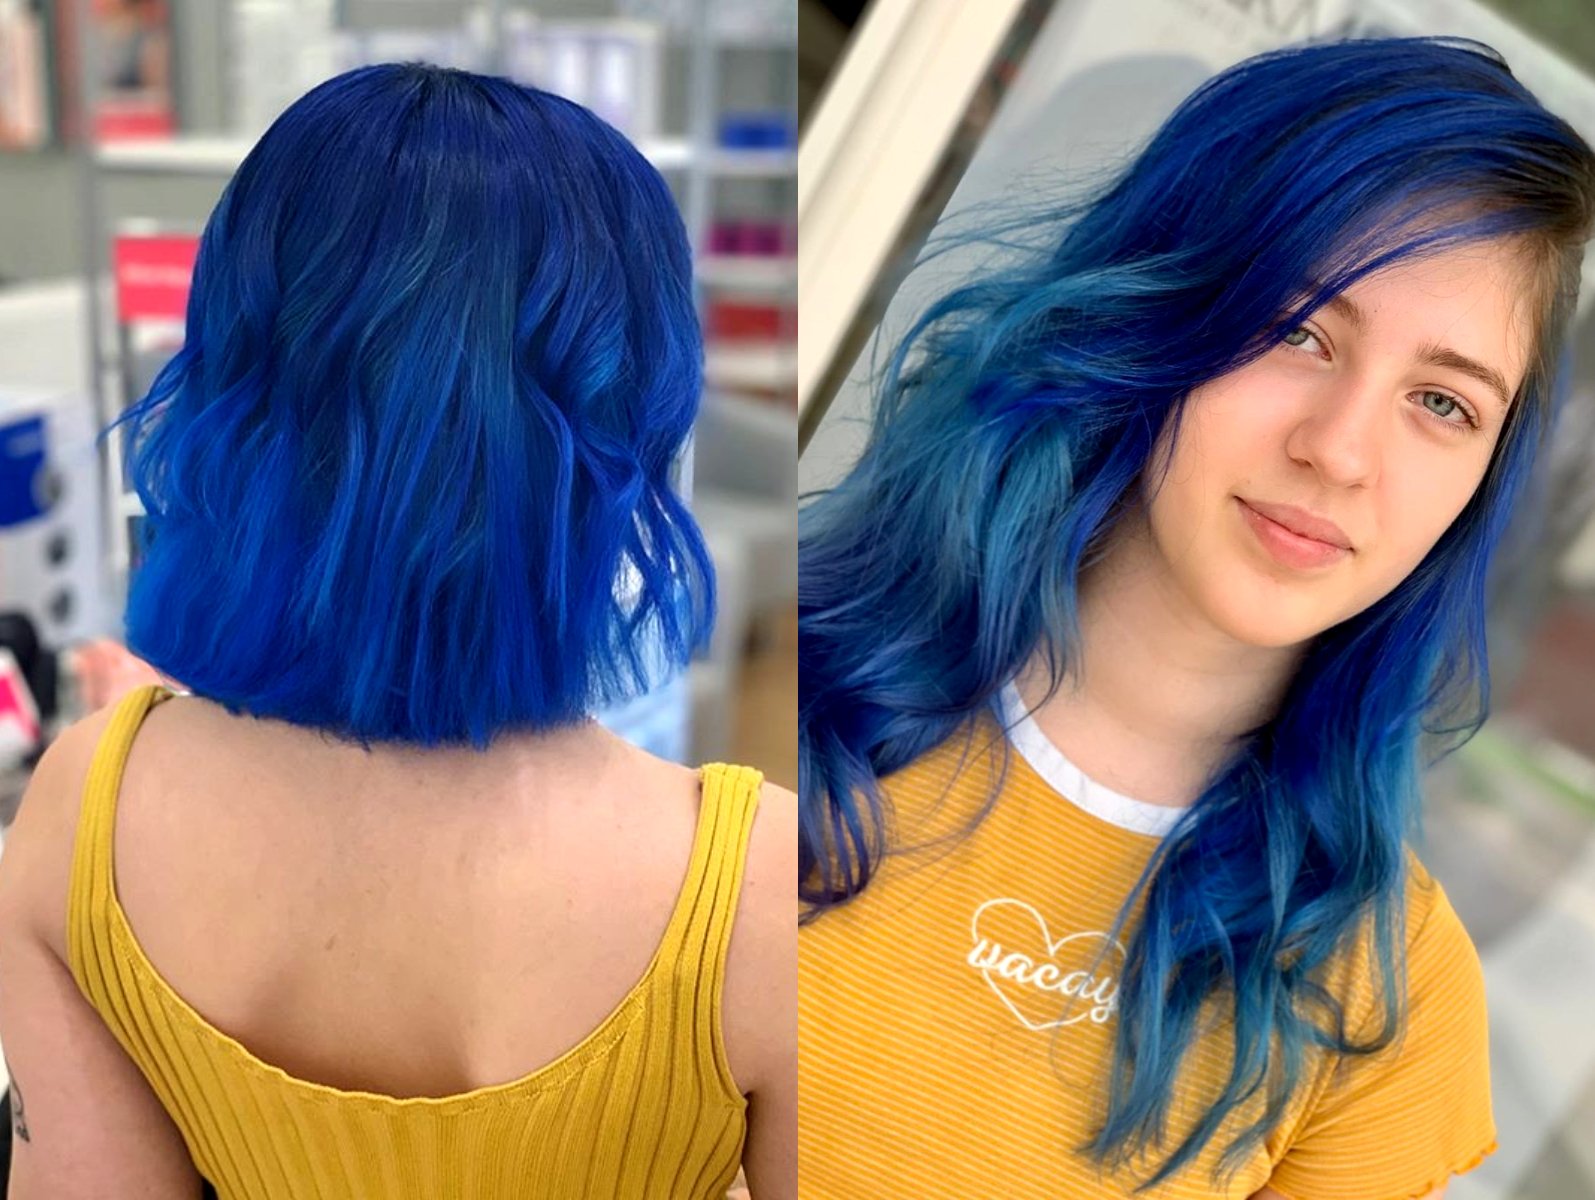 2. "Rooted Blue Balayage Hair" - wide 2